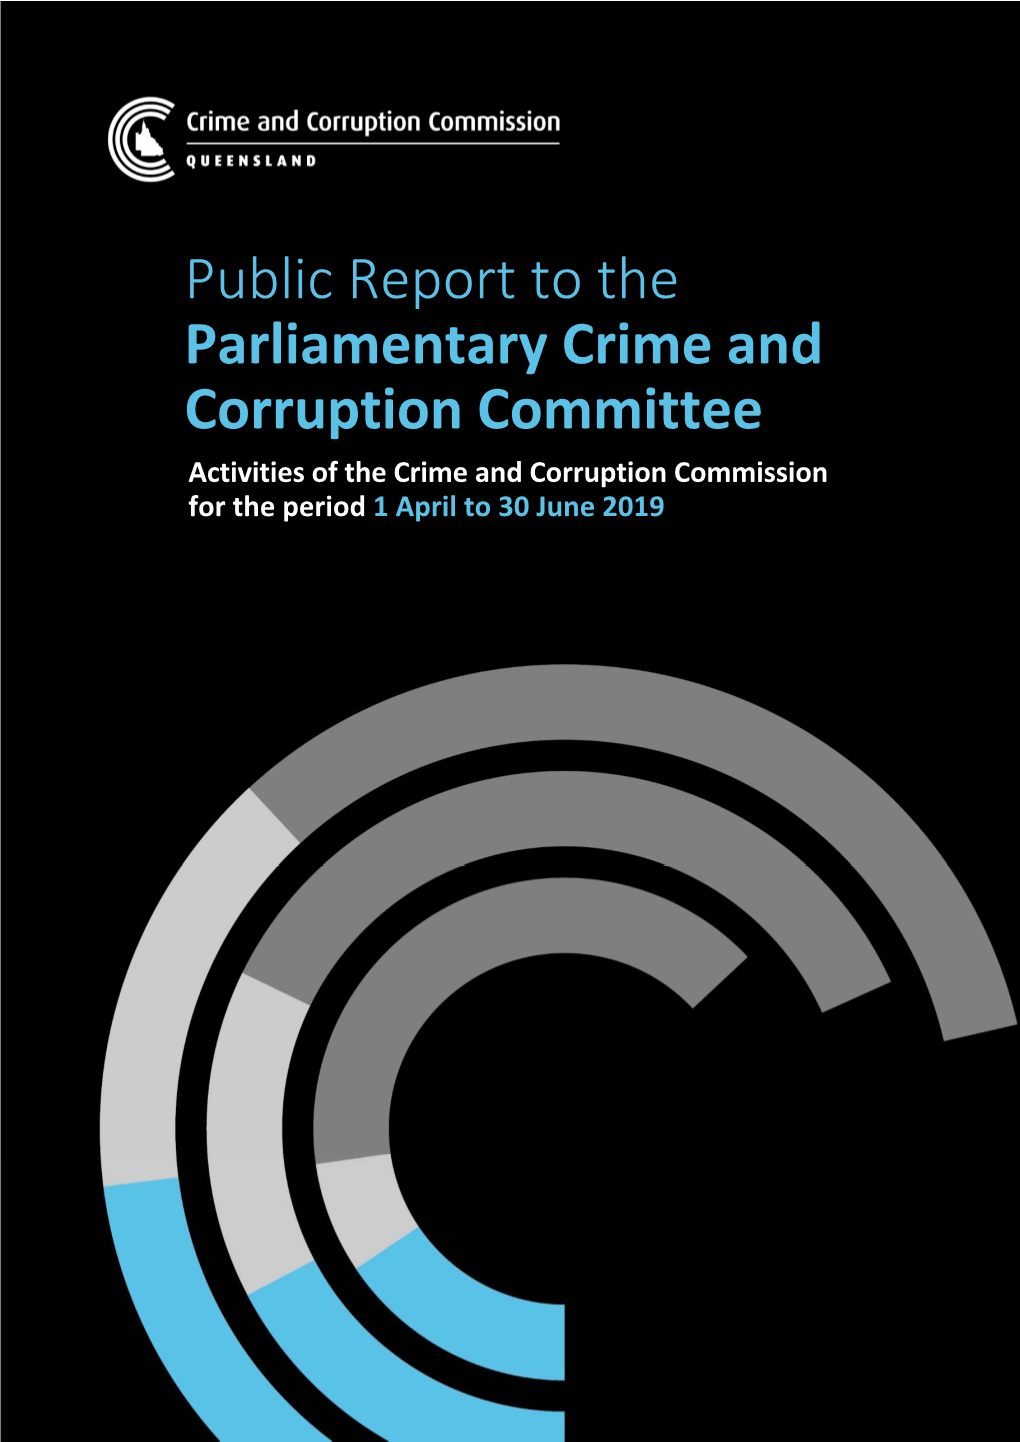 Public Report to the Parliamentary Crime and Corruption Committee Activities of the Crime and Corruption Commission for the Period 1 April to 30 June 2019